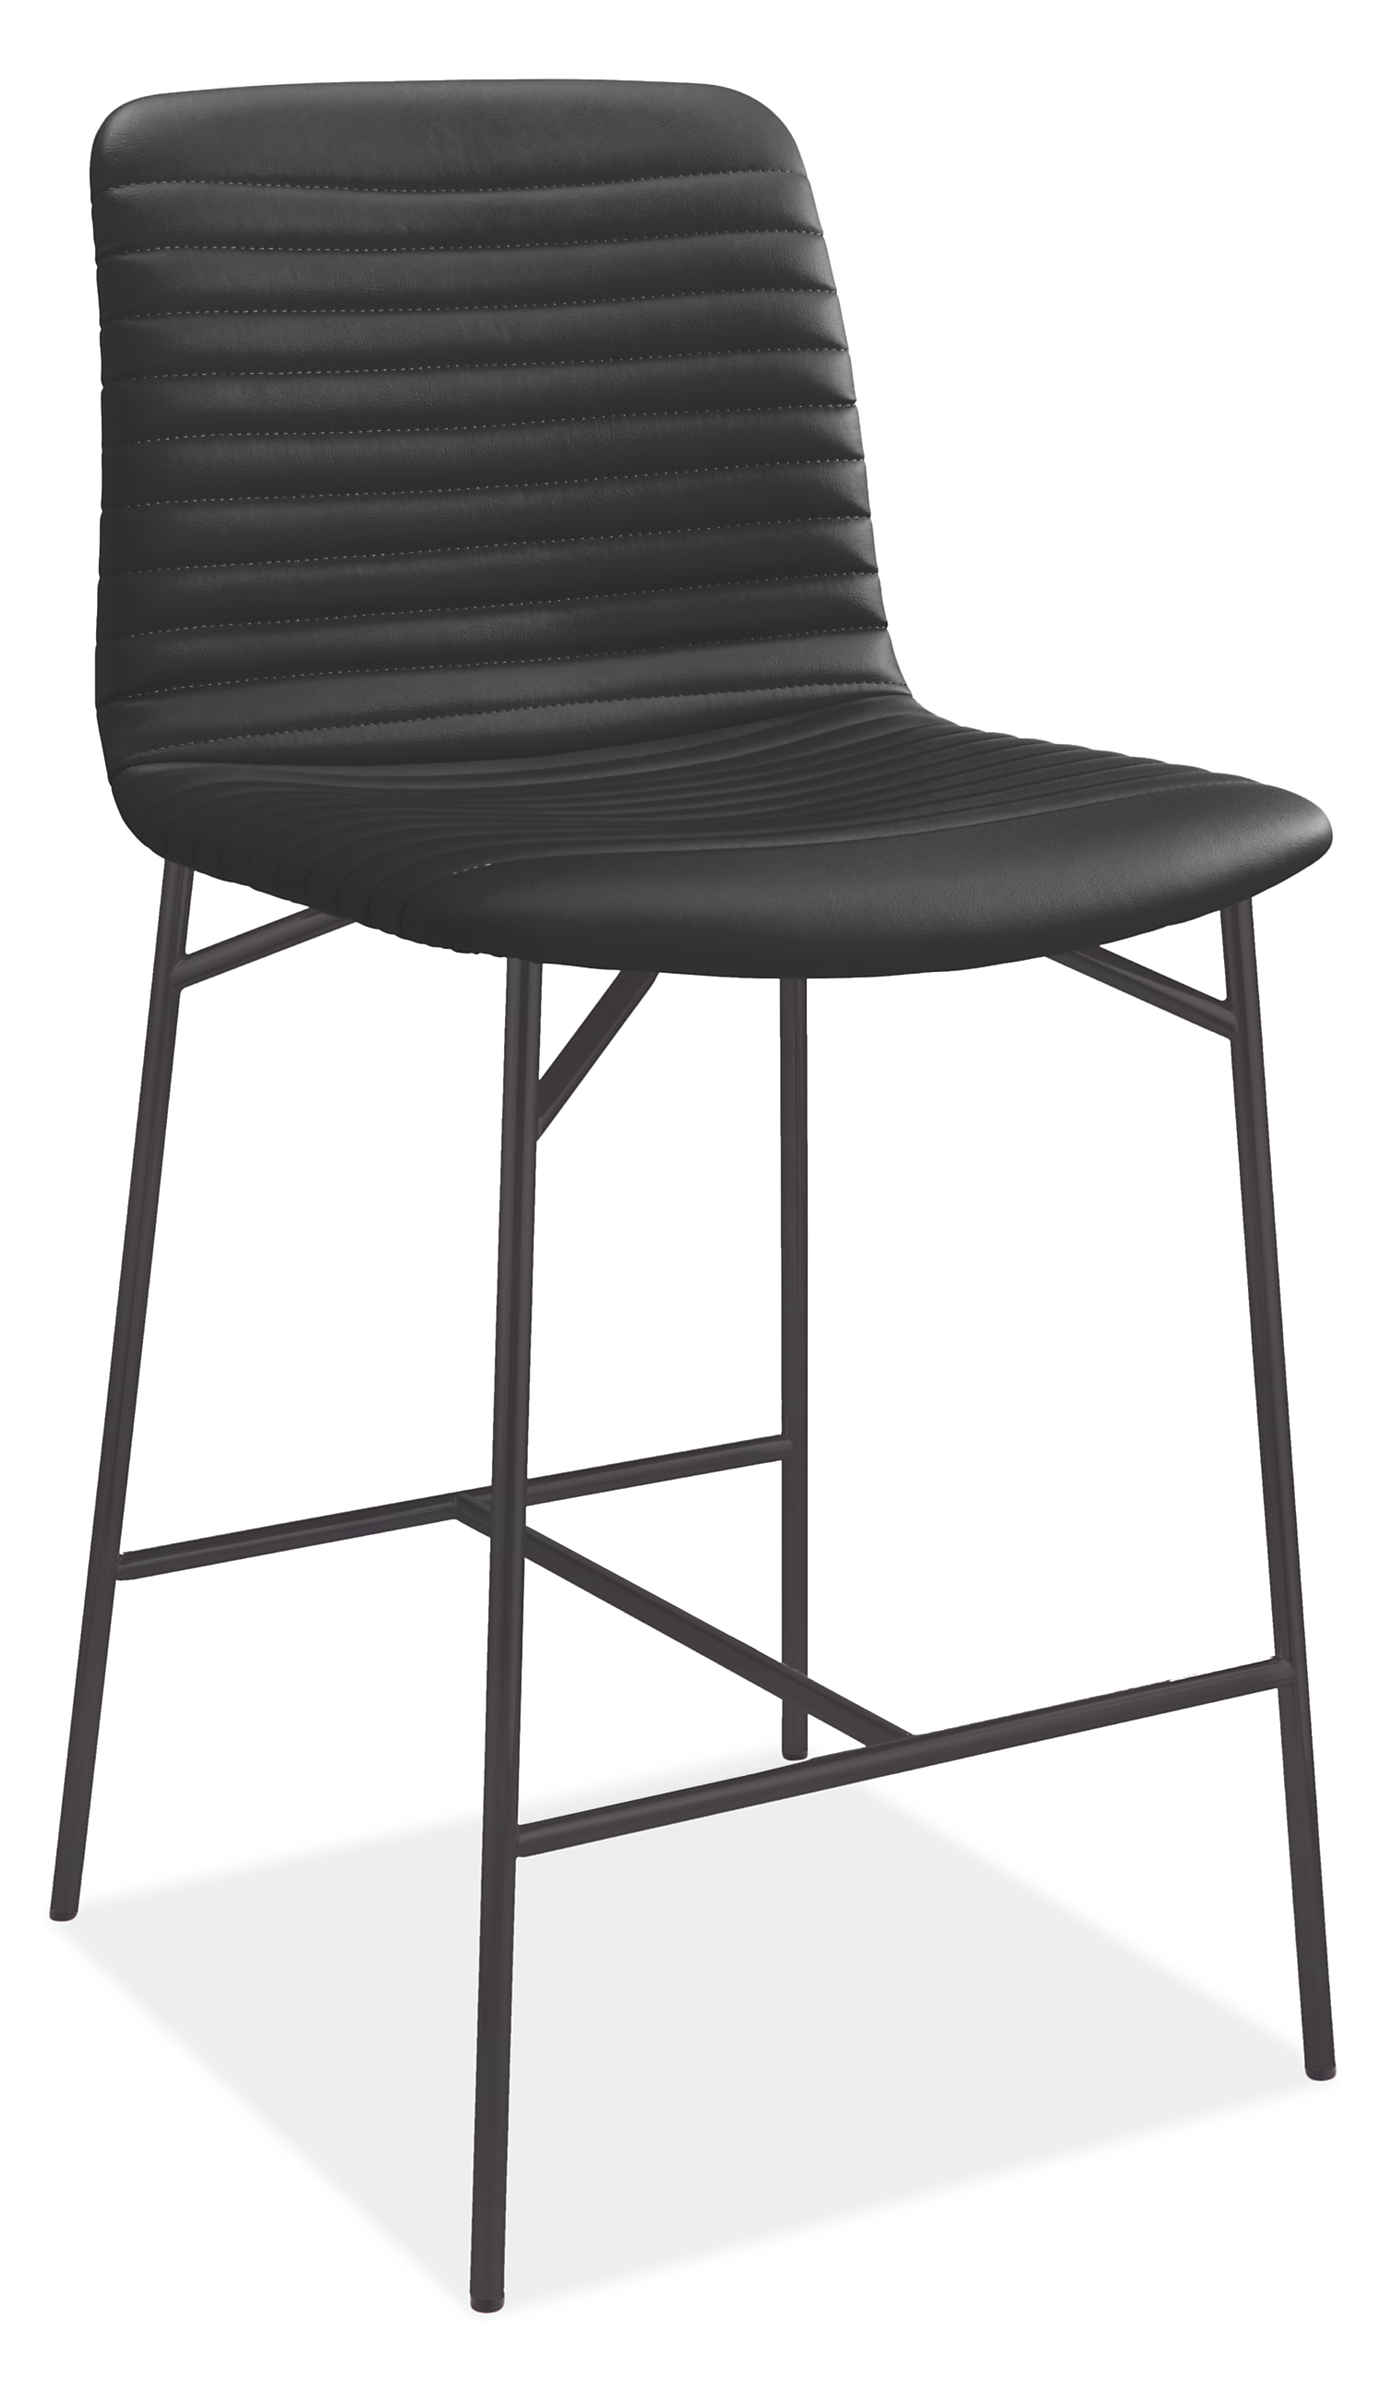 Cato Synthetic Leather Counter & Bar Stool